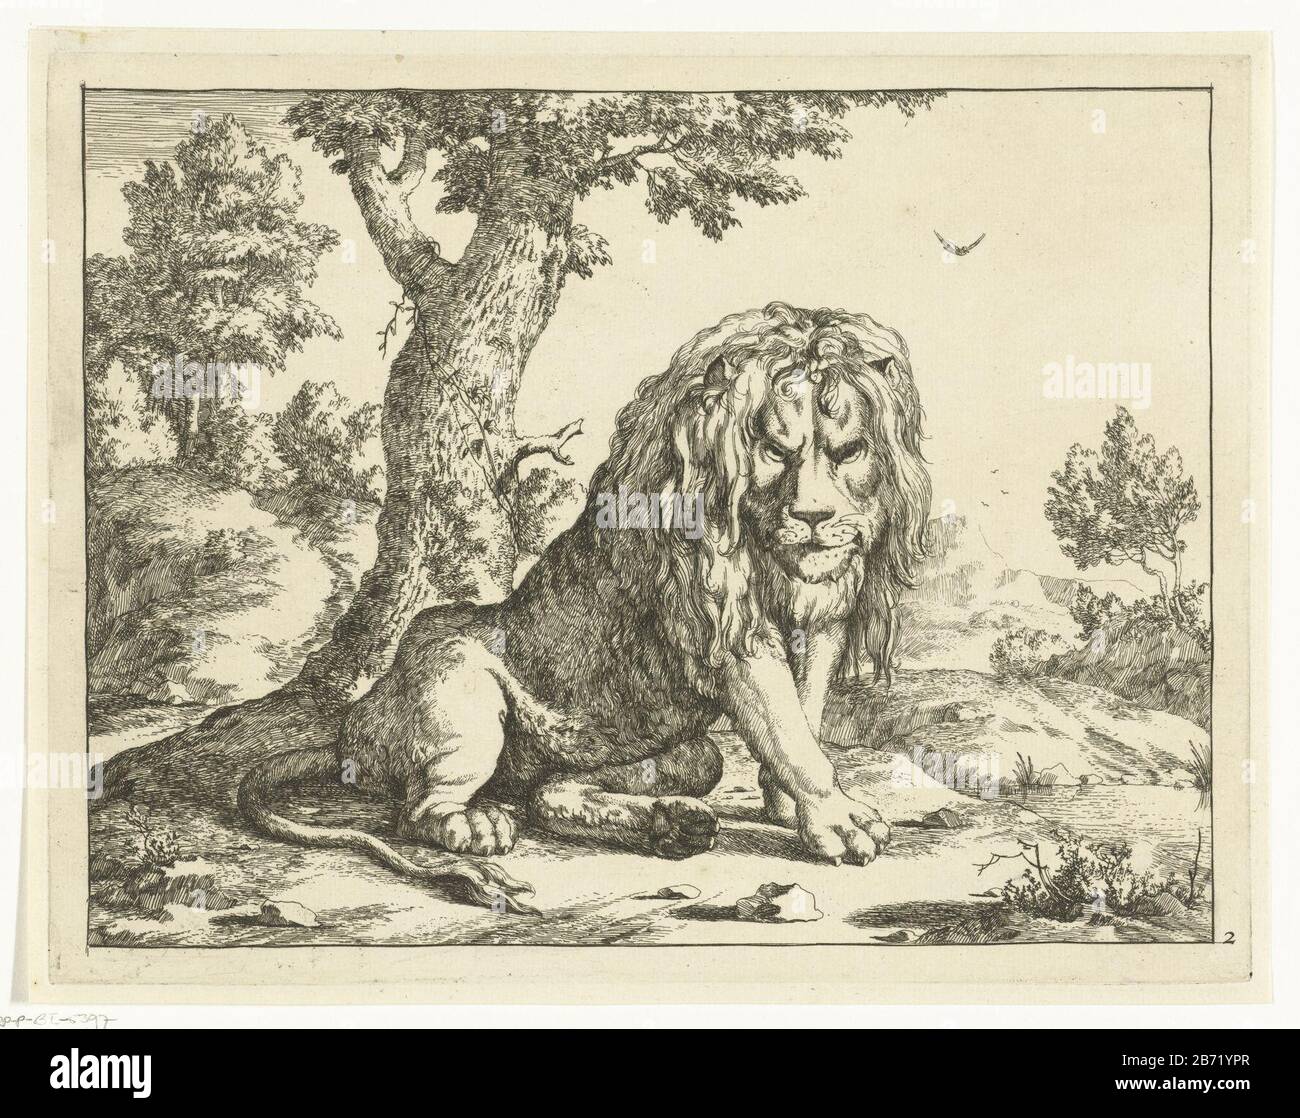 Leeuw zittend bij boom Leeuwen (serietitel) Lion sitting in tree lions (series title) Property Type: print Serial number: 2 / 8Objectnummer: RP-P-BI 5397Catalogusreferentie: Hollstein Dutch 50Opmerking: state 2 or 3 three known states inscriptions / Brands: collector's mark, verso, stamped: Lugt 2228 Manufacturer : printmaker: Marcus Byenaar design: Paulus Potter Place manufacture: Den Haag Date: 1664 Physical features: etching material: paper Technique: etching dimensions: plate edge: h 174 mm × W 225 mm Subject: beasts of prey, predatory animal Stock Photo